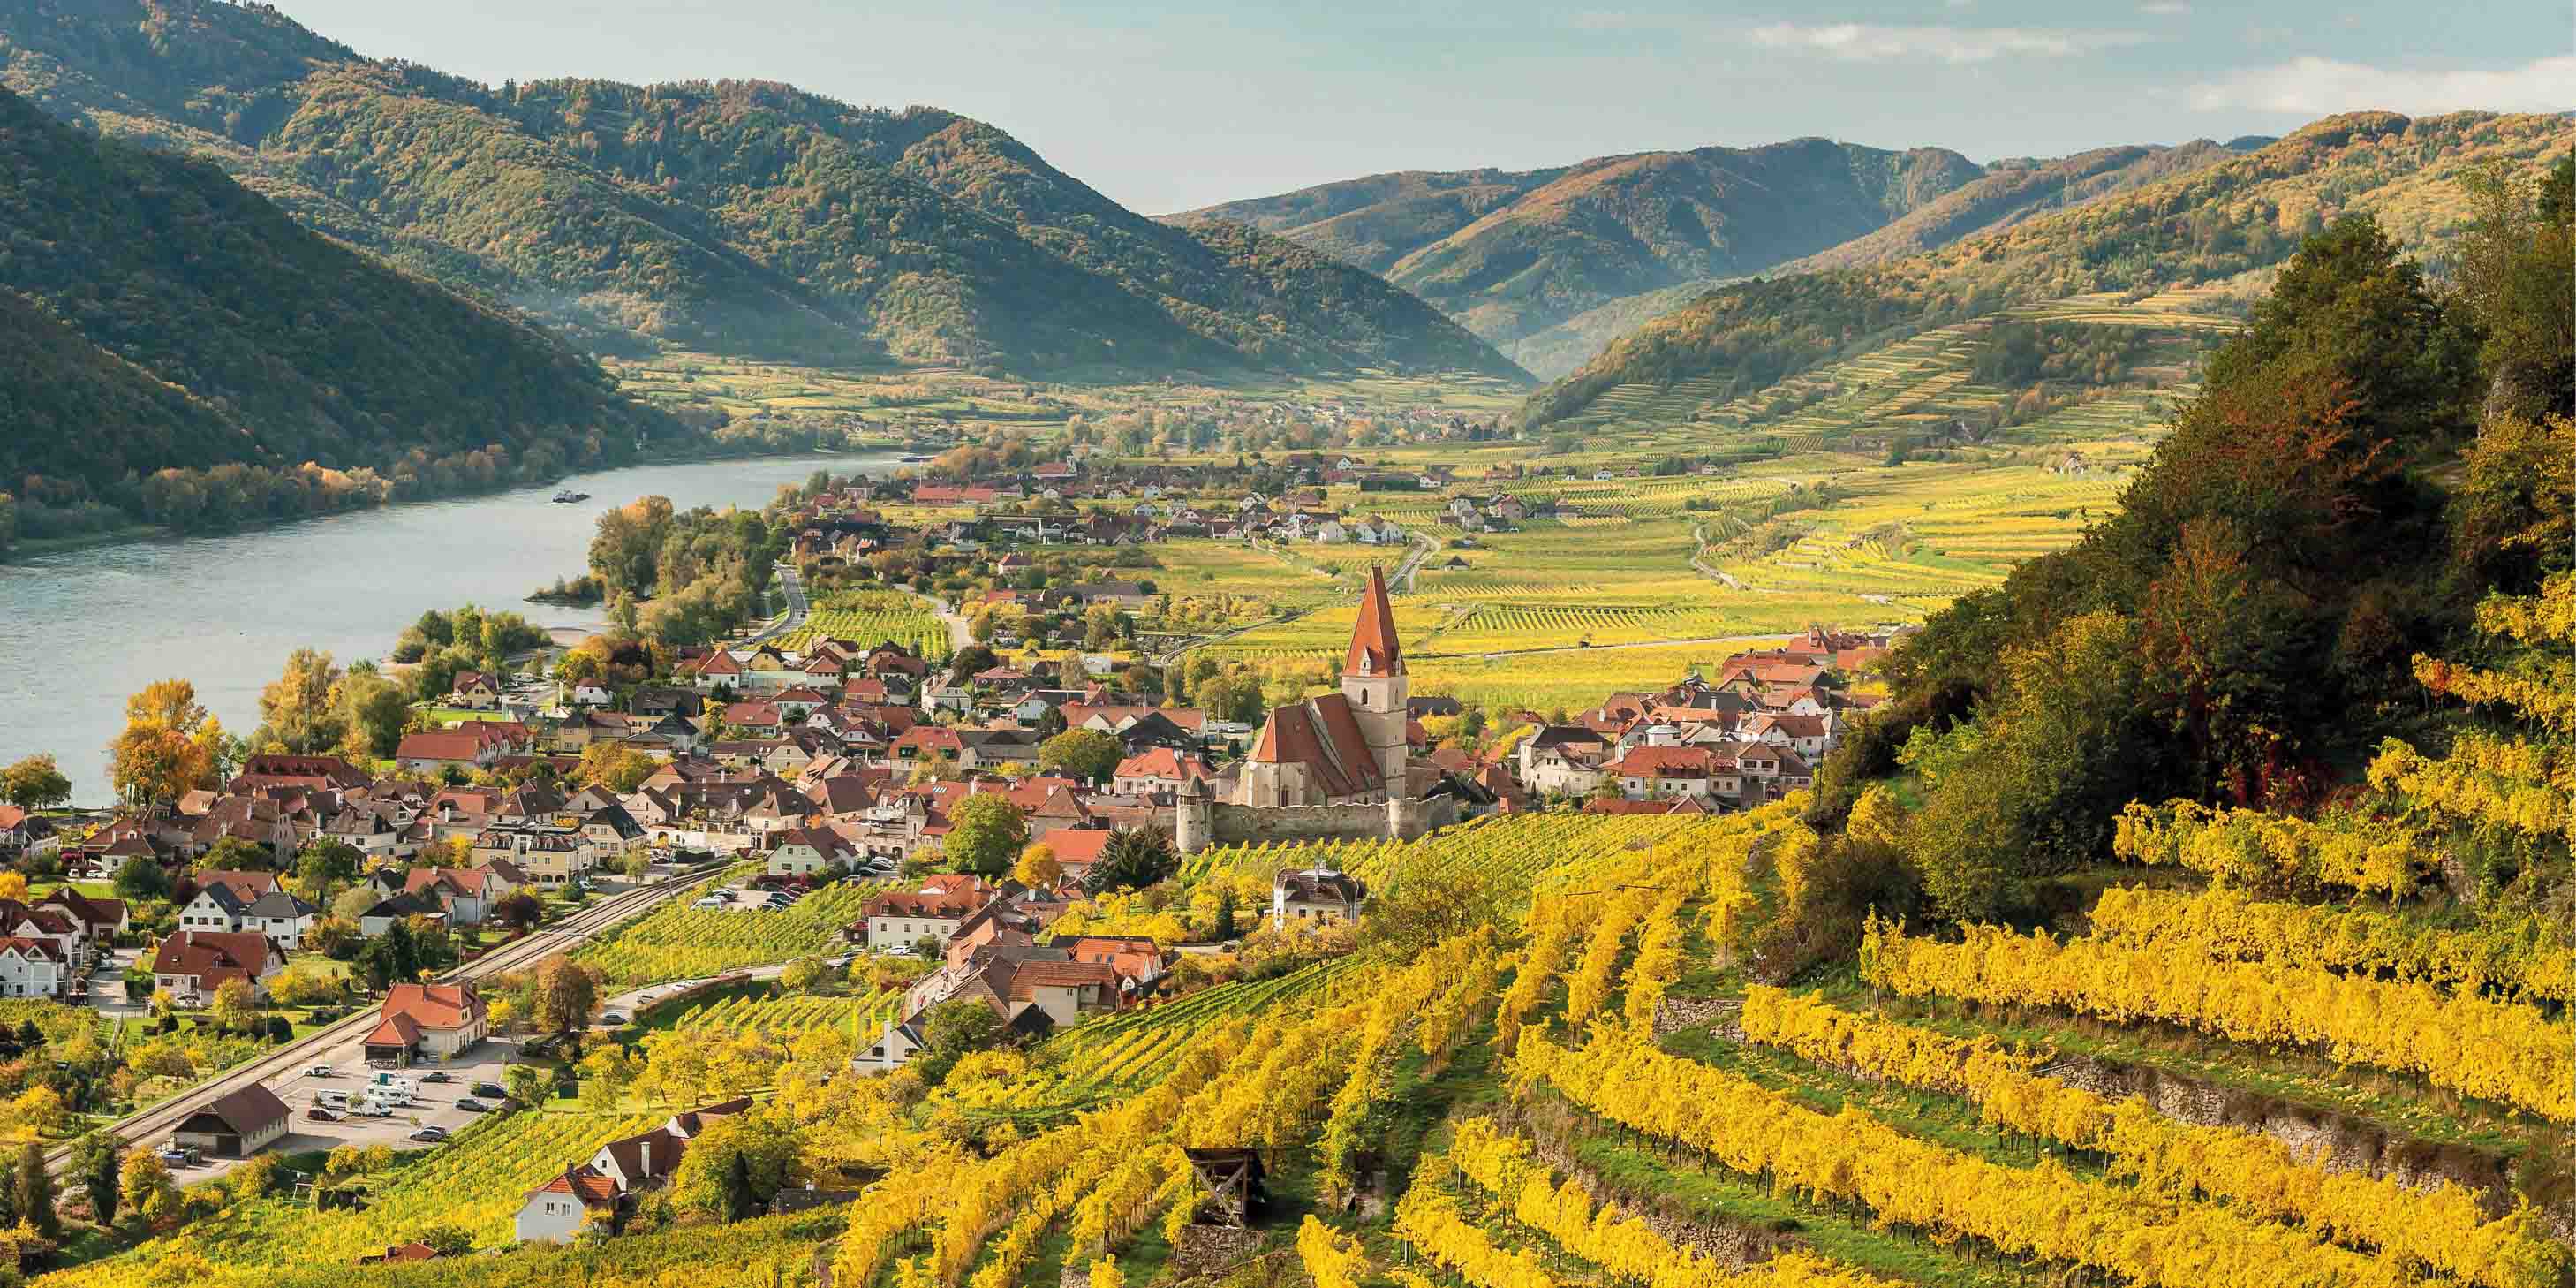 Quaint village nestled amongst the vineyards and lush green mountains in the striking Wachau Valley along the Danube River